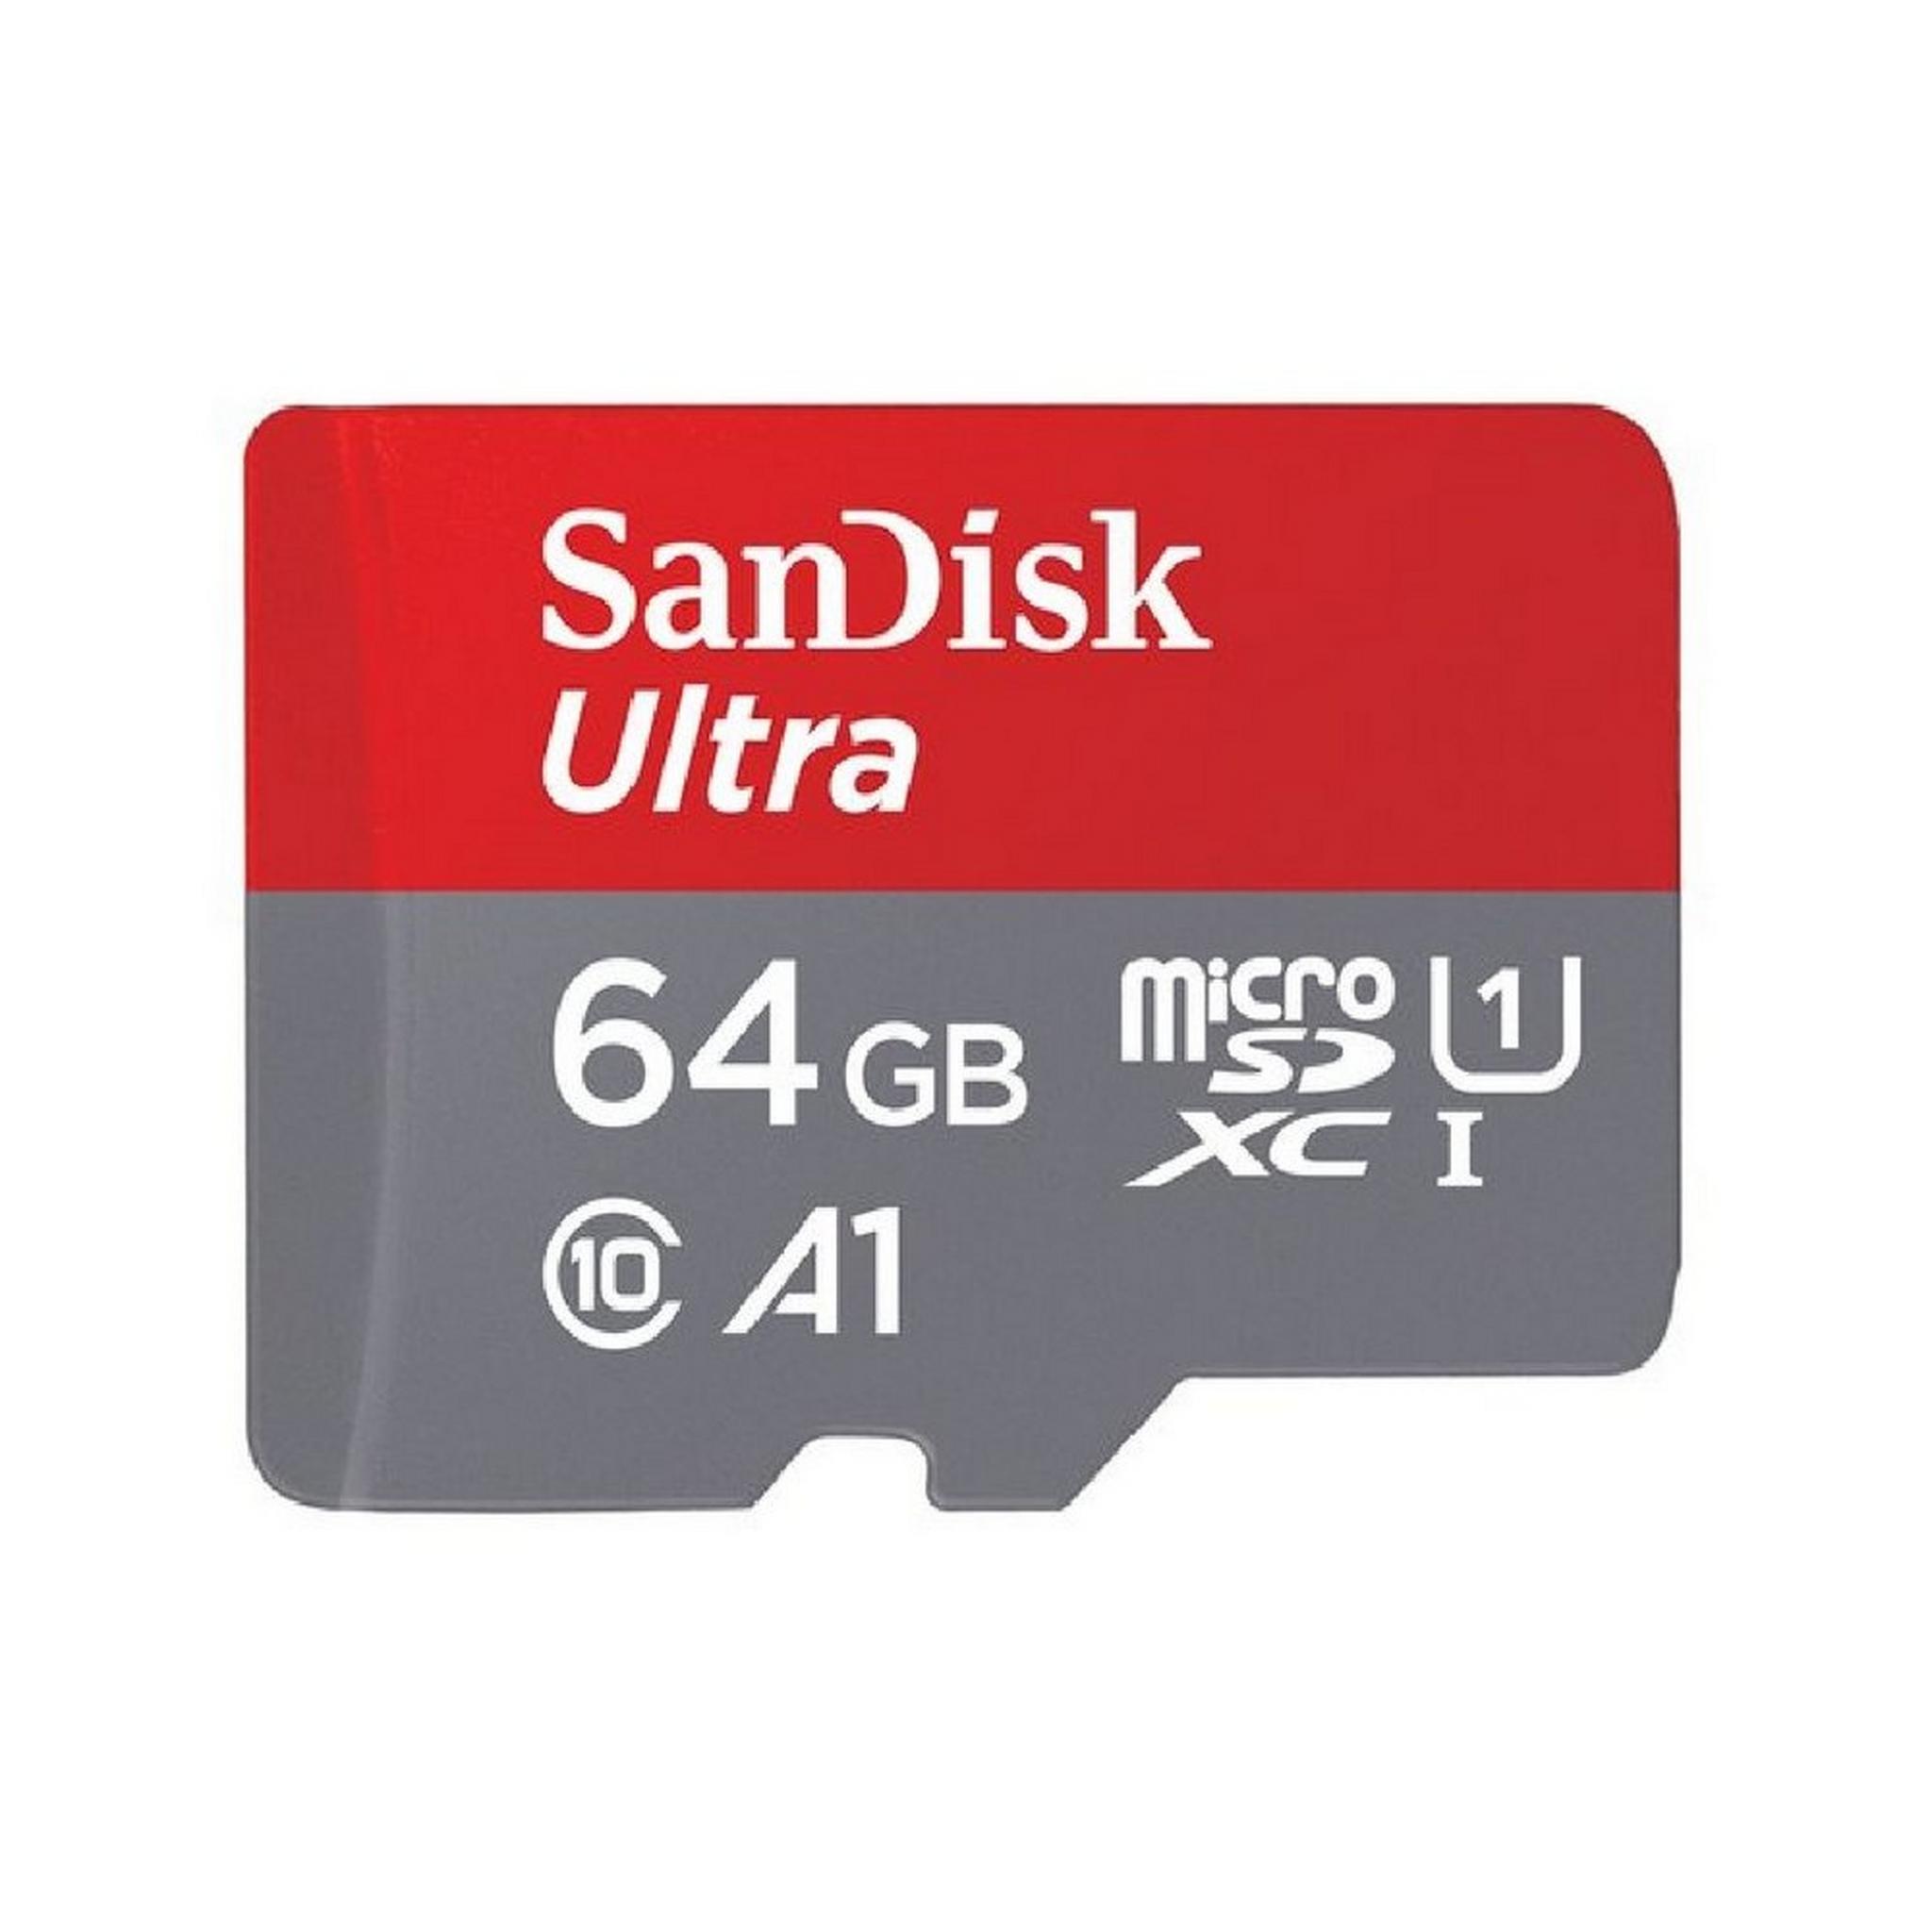 SanDisk Ultra UHS I 64GB MicroSD Card for Action Cameras / Smartphones, 140MB/s R, SDSQUAB-064G-GN6MN